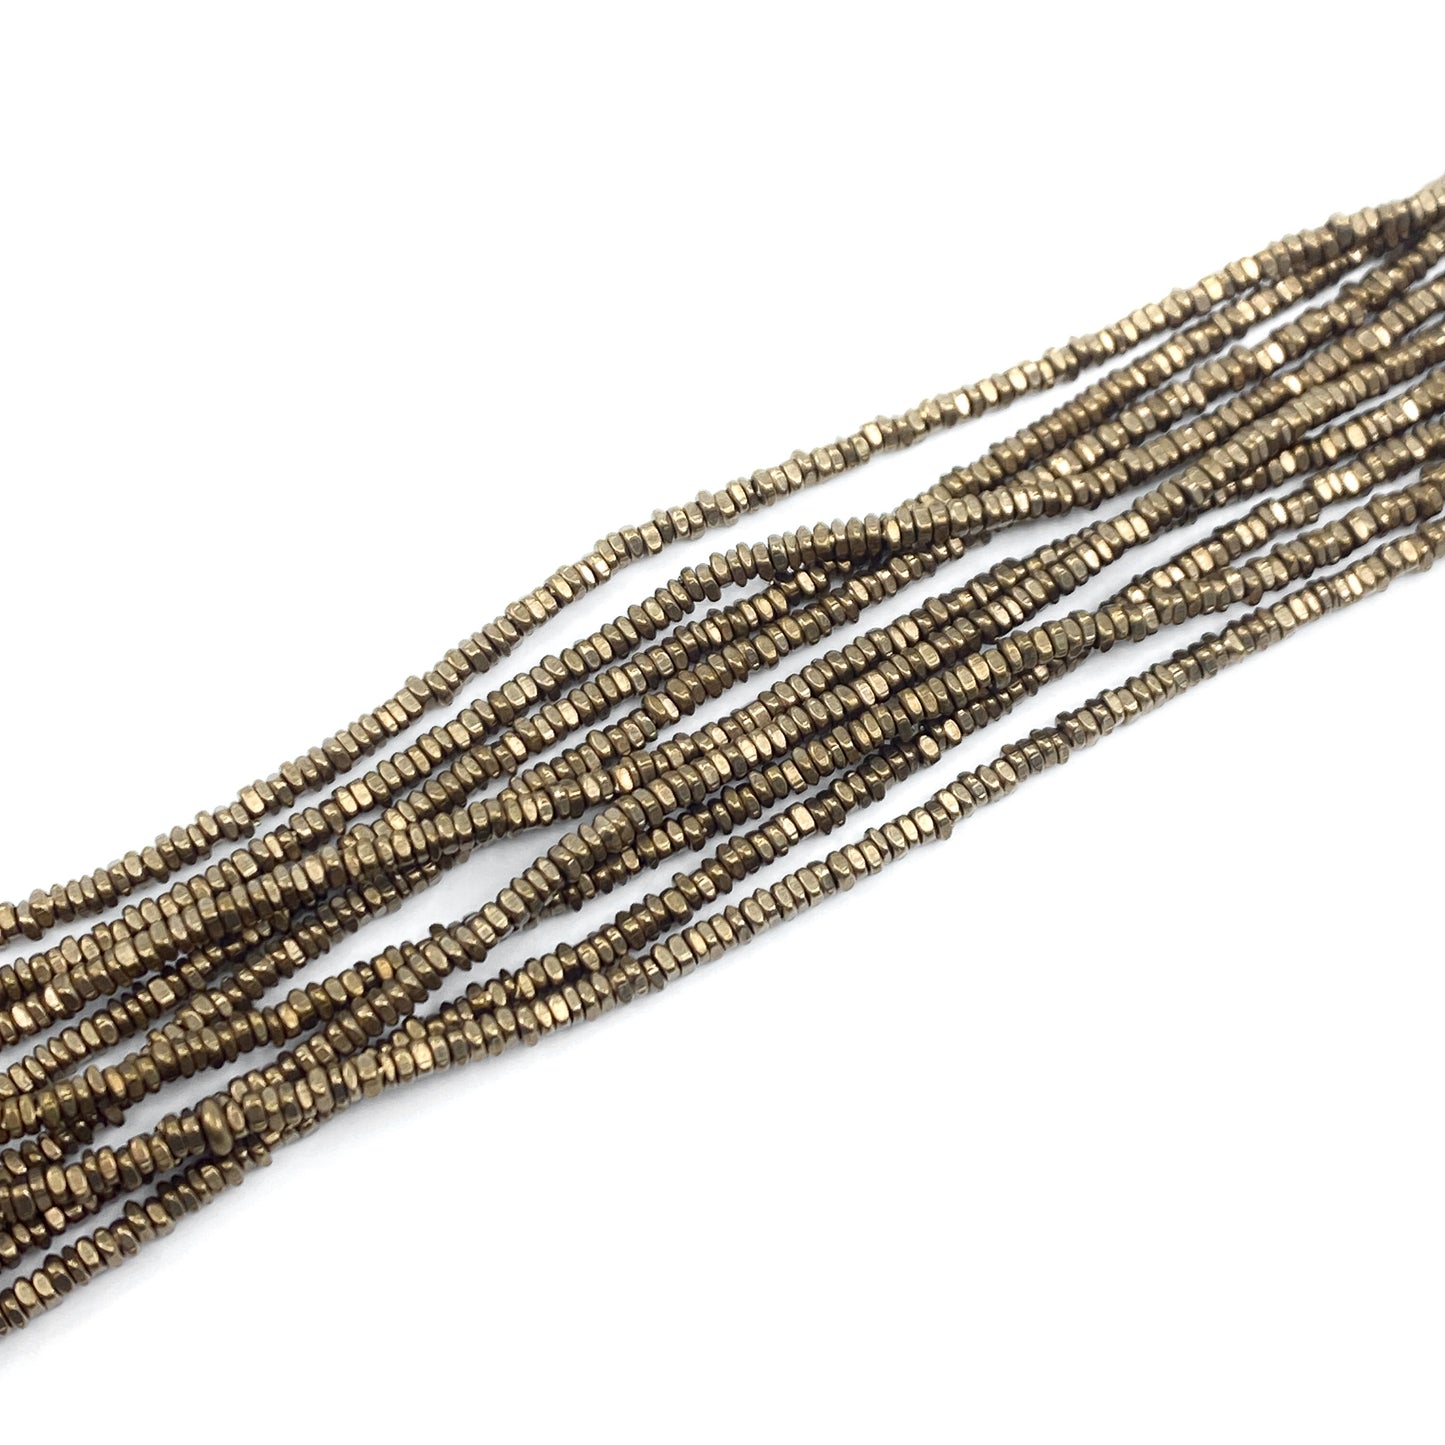 3mm Rustic Square Spacer Bead (5 Colors Available) - 12" Strand